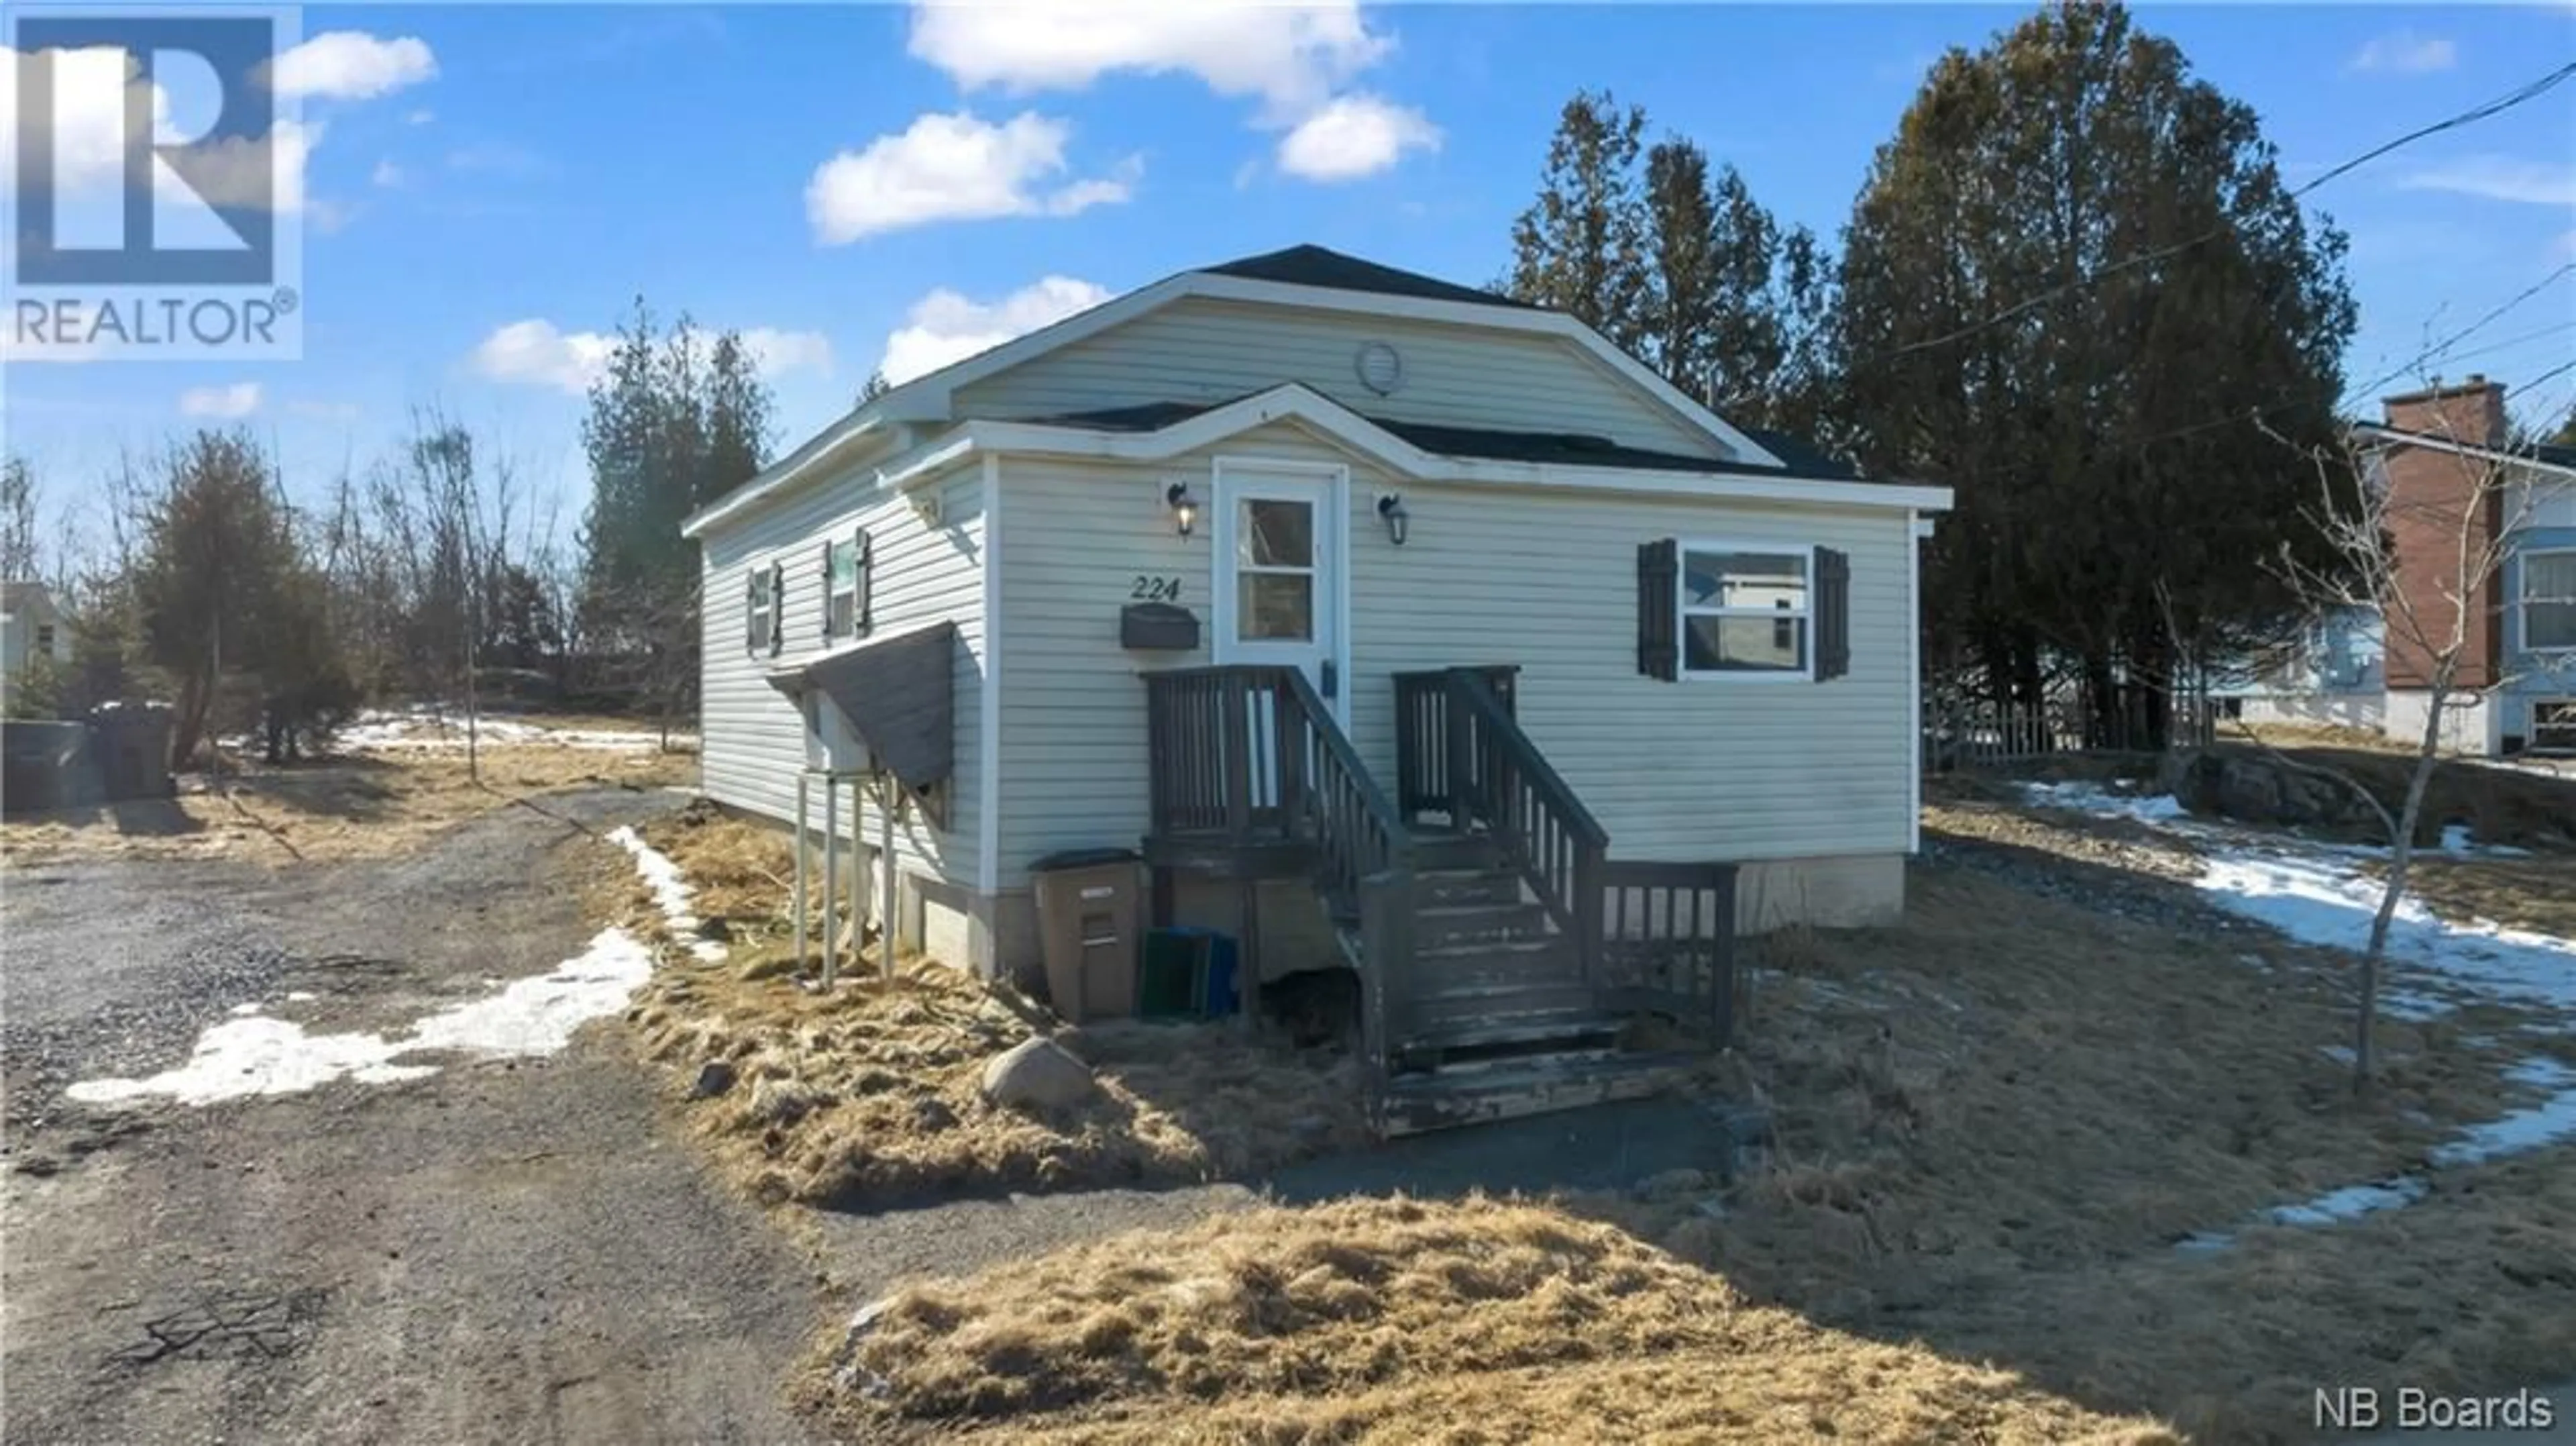 Home with unknown exterior material for 224 Milford Road, Saint John New Brunswick E2M4R4